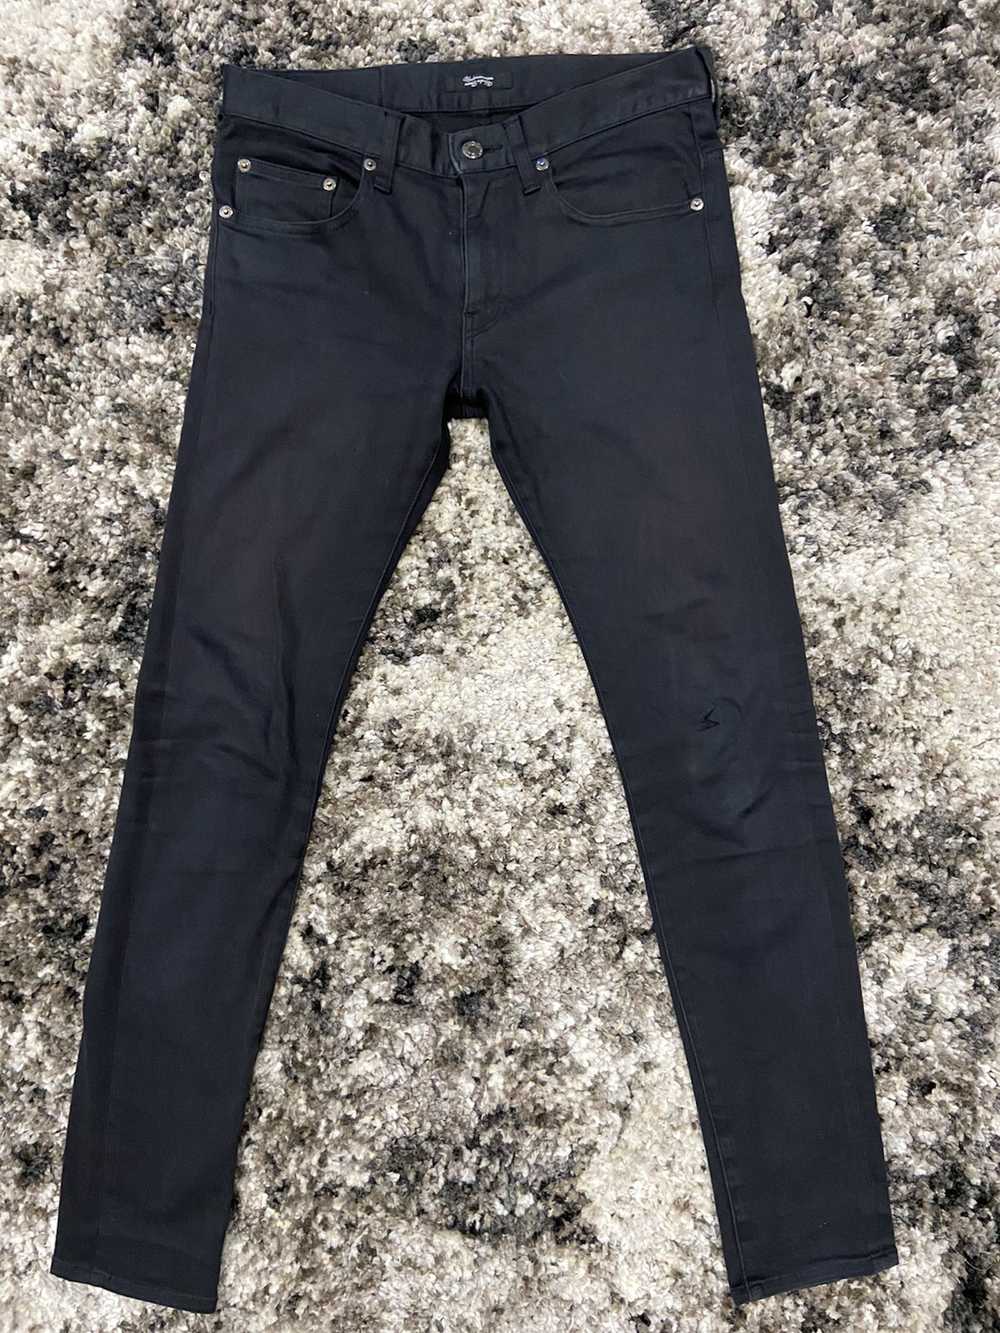 Jun Takahashi × Undercover Undercover Jeans - image 1